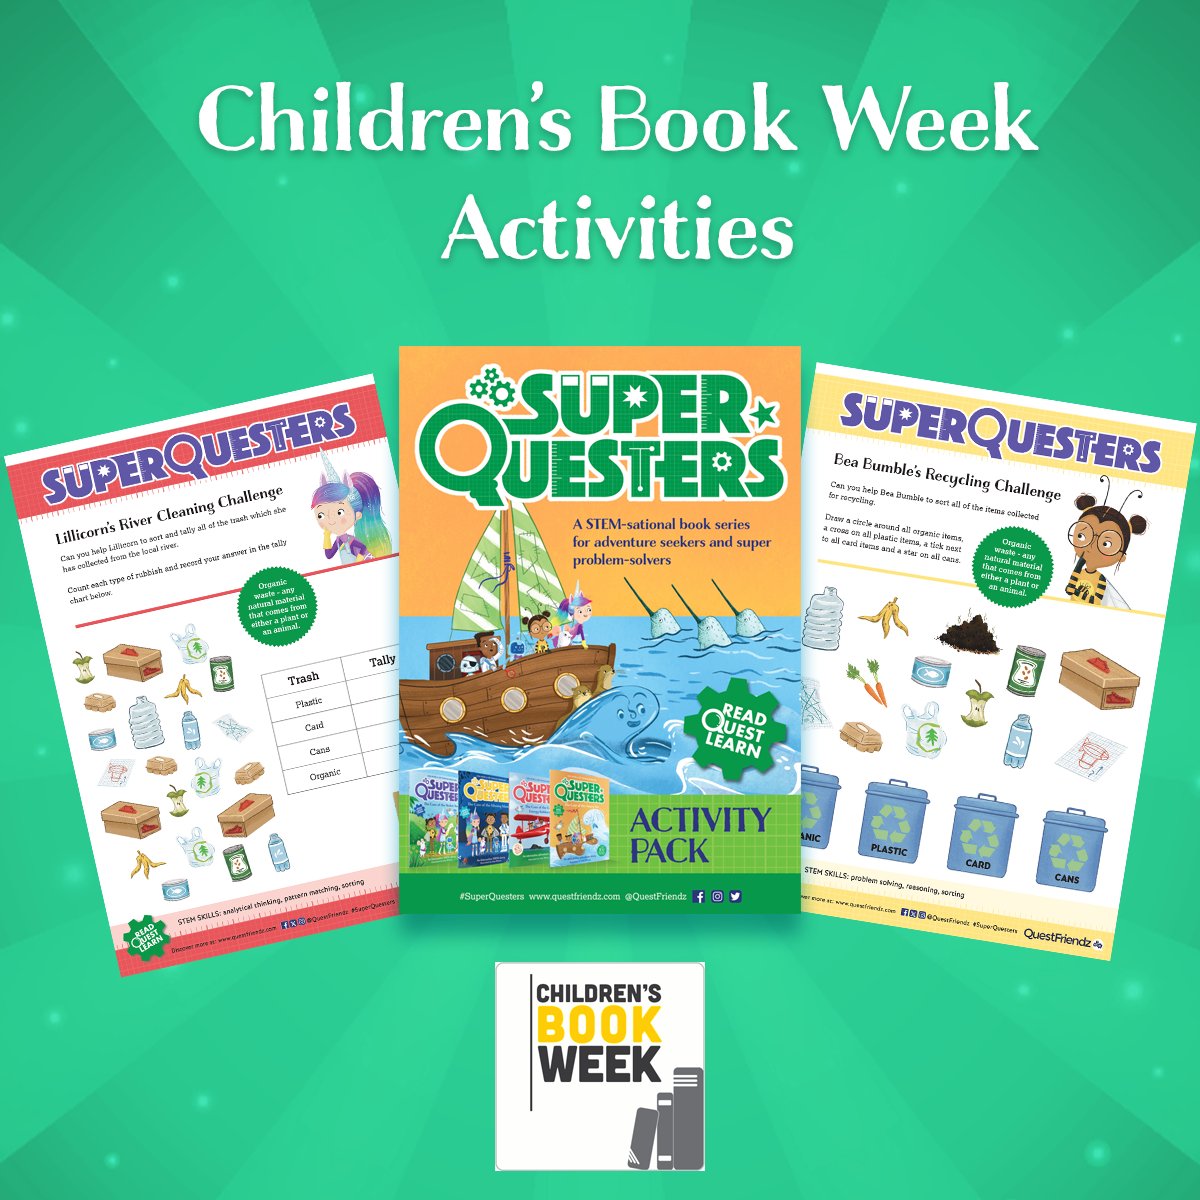 📚 Looking for a way to celebrate #childrensbooksweek? 🧲 Why not try our FREE SuperQuesters Activity Pack. 🏆 This activity pack includes SIX FREE activities AND a certificate. Making reading extra fun! Download it now: bit.ly/49qMZHl